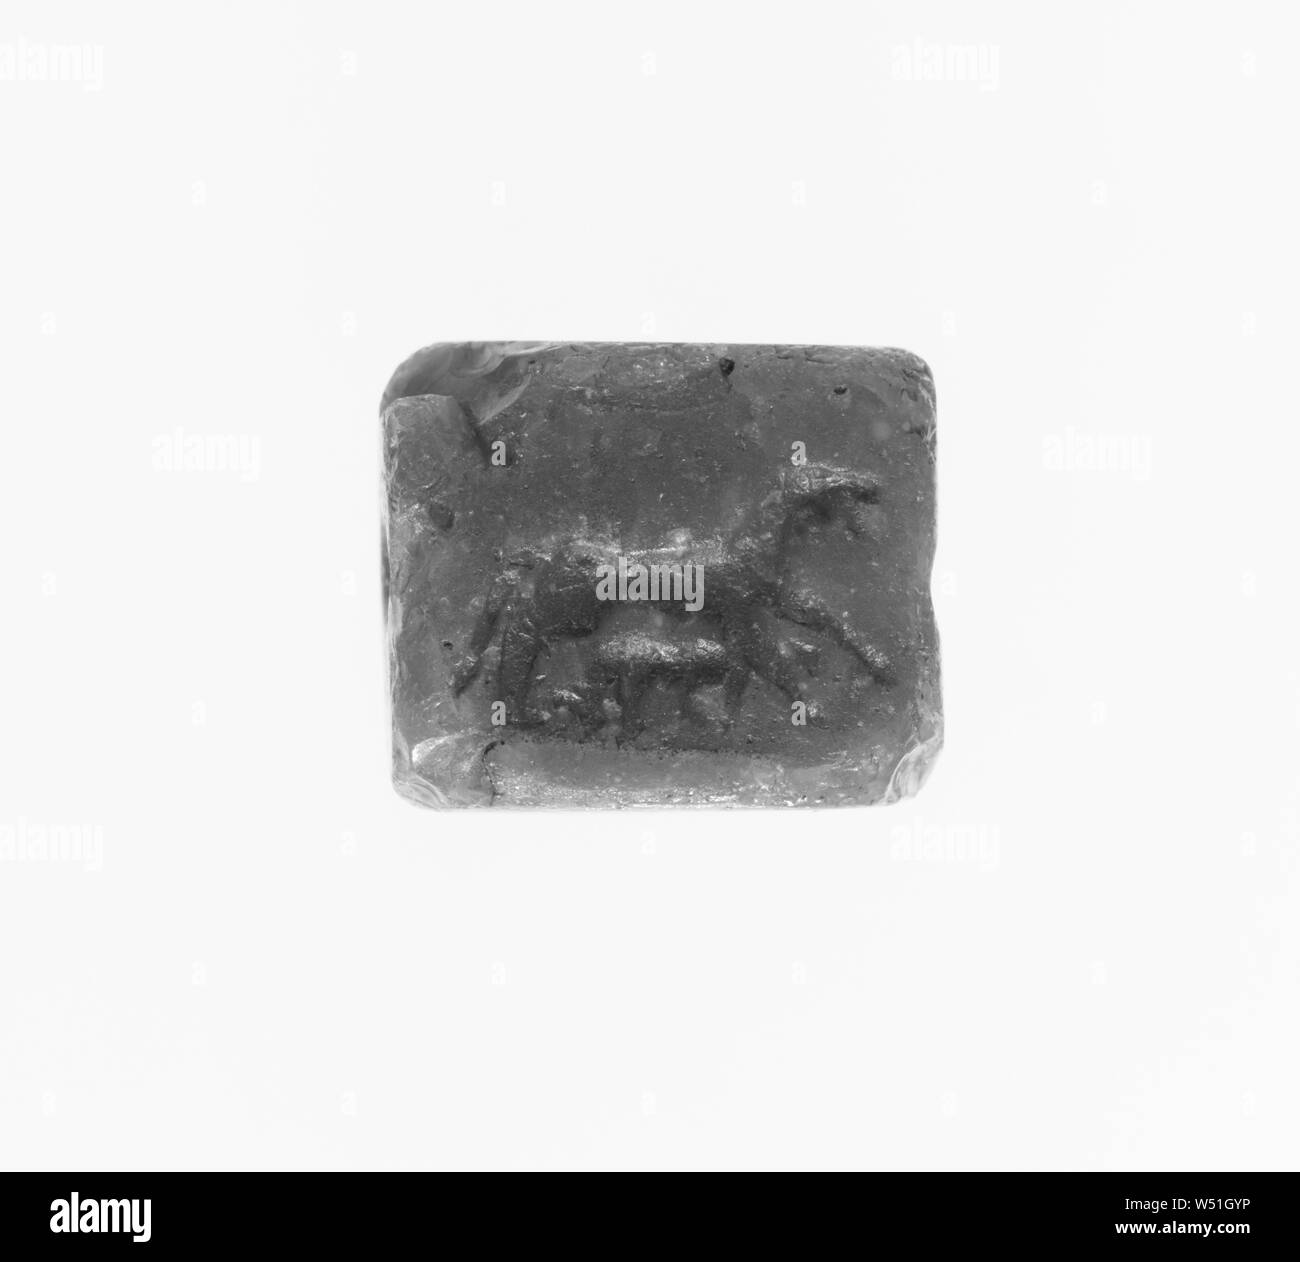 Engraved Tabloid, Unknown, Syria (?), 4th century B.C., Opaque blue glass, 1.7 × 1.5 × 0.9 cm (11/16 × 5/8 × 3/8 in Stock Photo